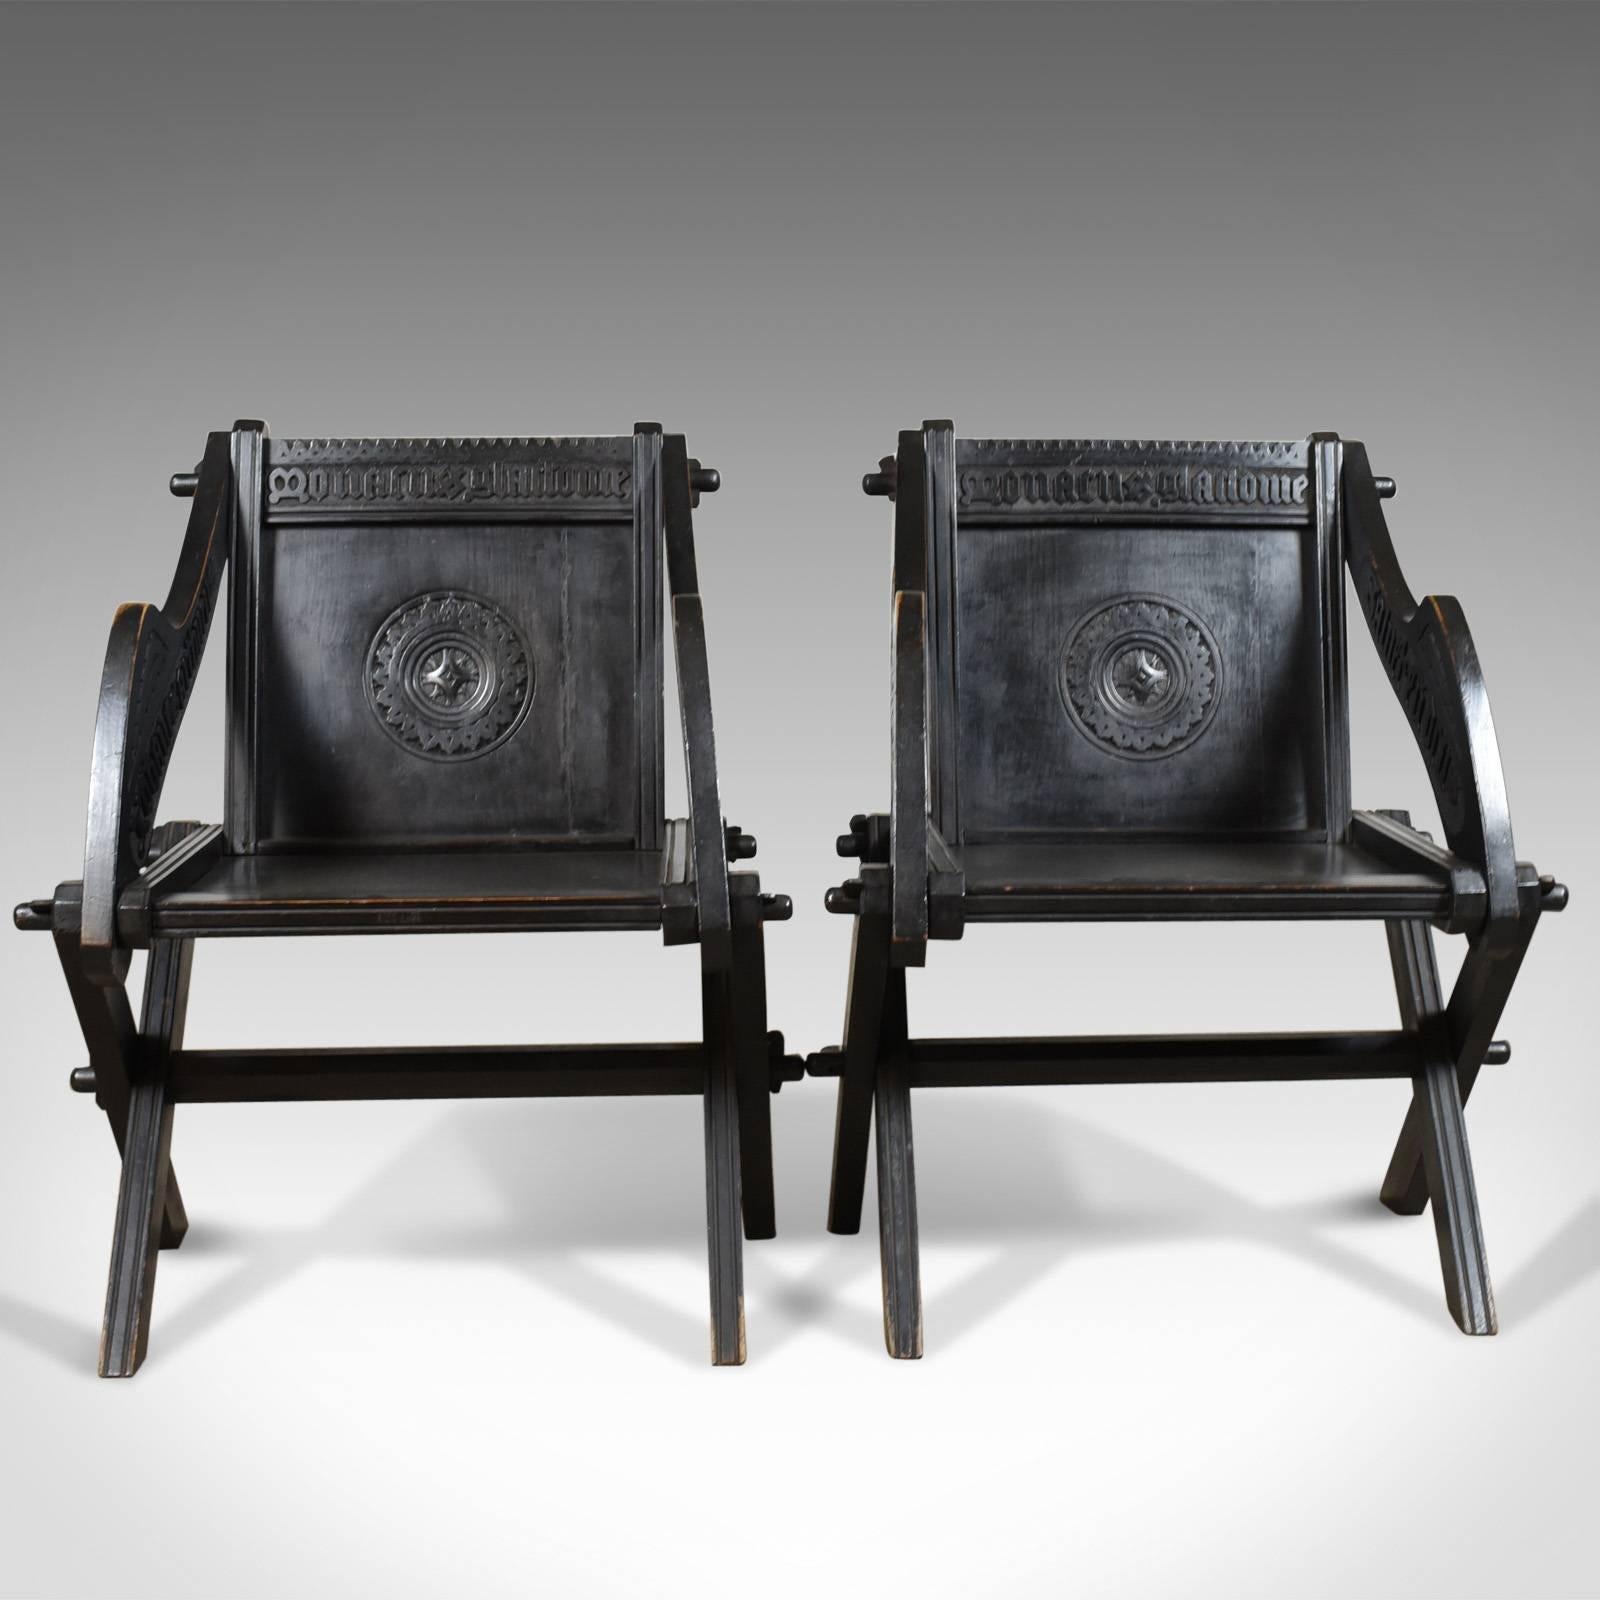 This is a pair of antique Glastonbury chairs, English Tudor Revival carved hall seats dating to the early 20th century, circa 1900.

A fine pair of Glastonbury chairs faithful to their origins
Exhibiting ecclesiastical and gothic